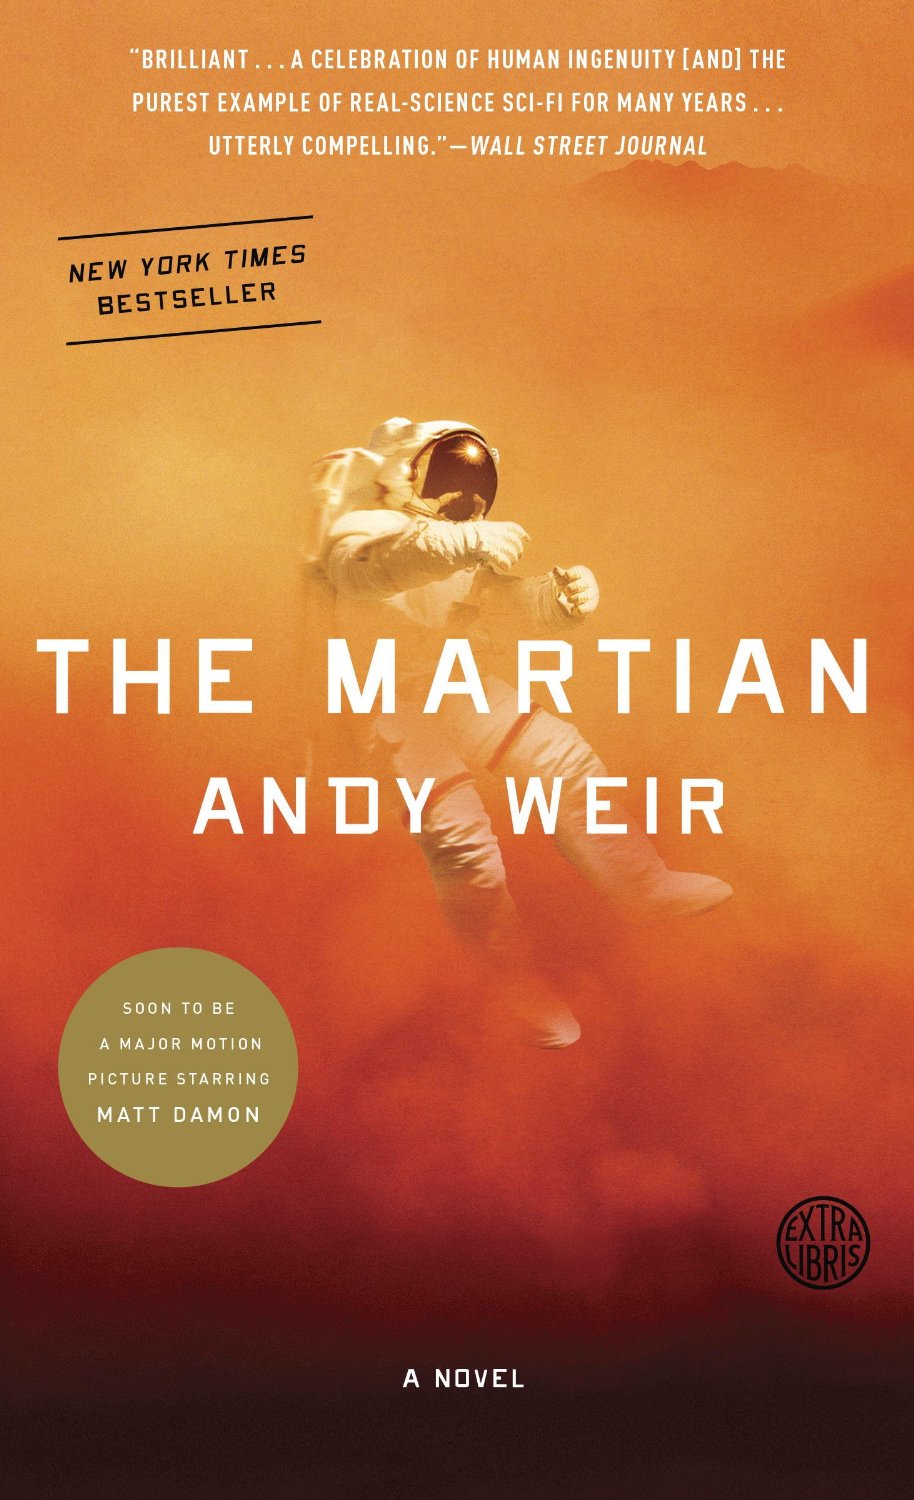 Gear Diary Book Club Discussion of The Martian!